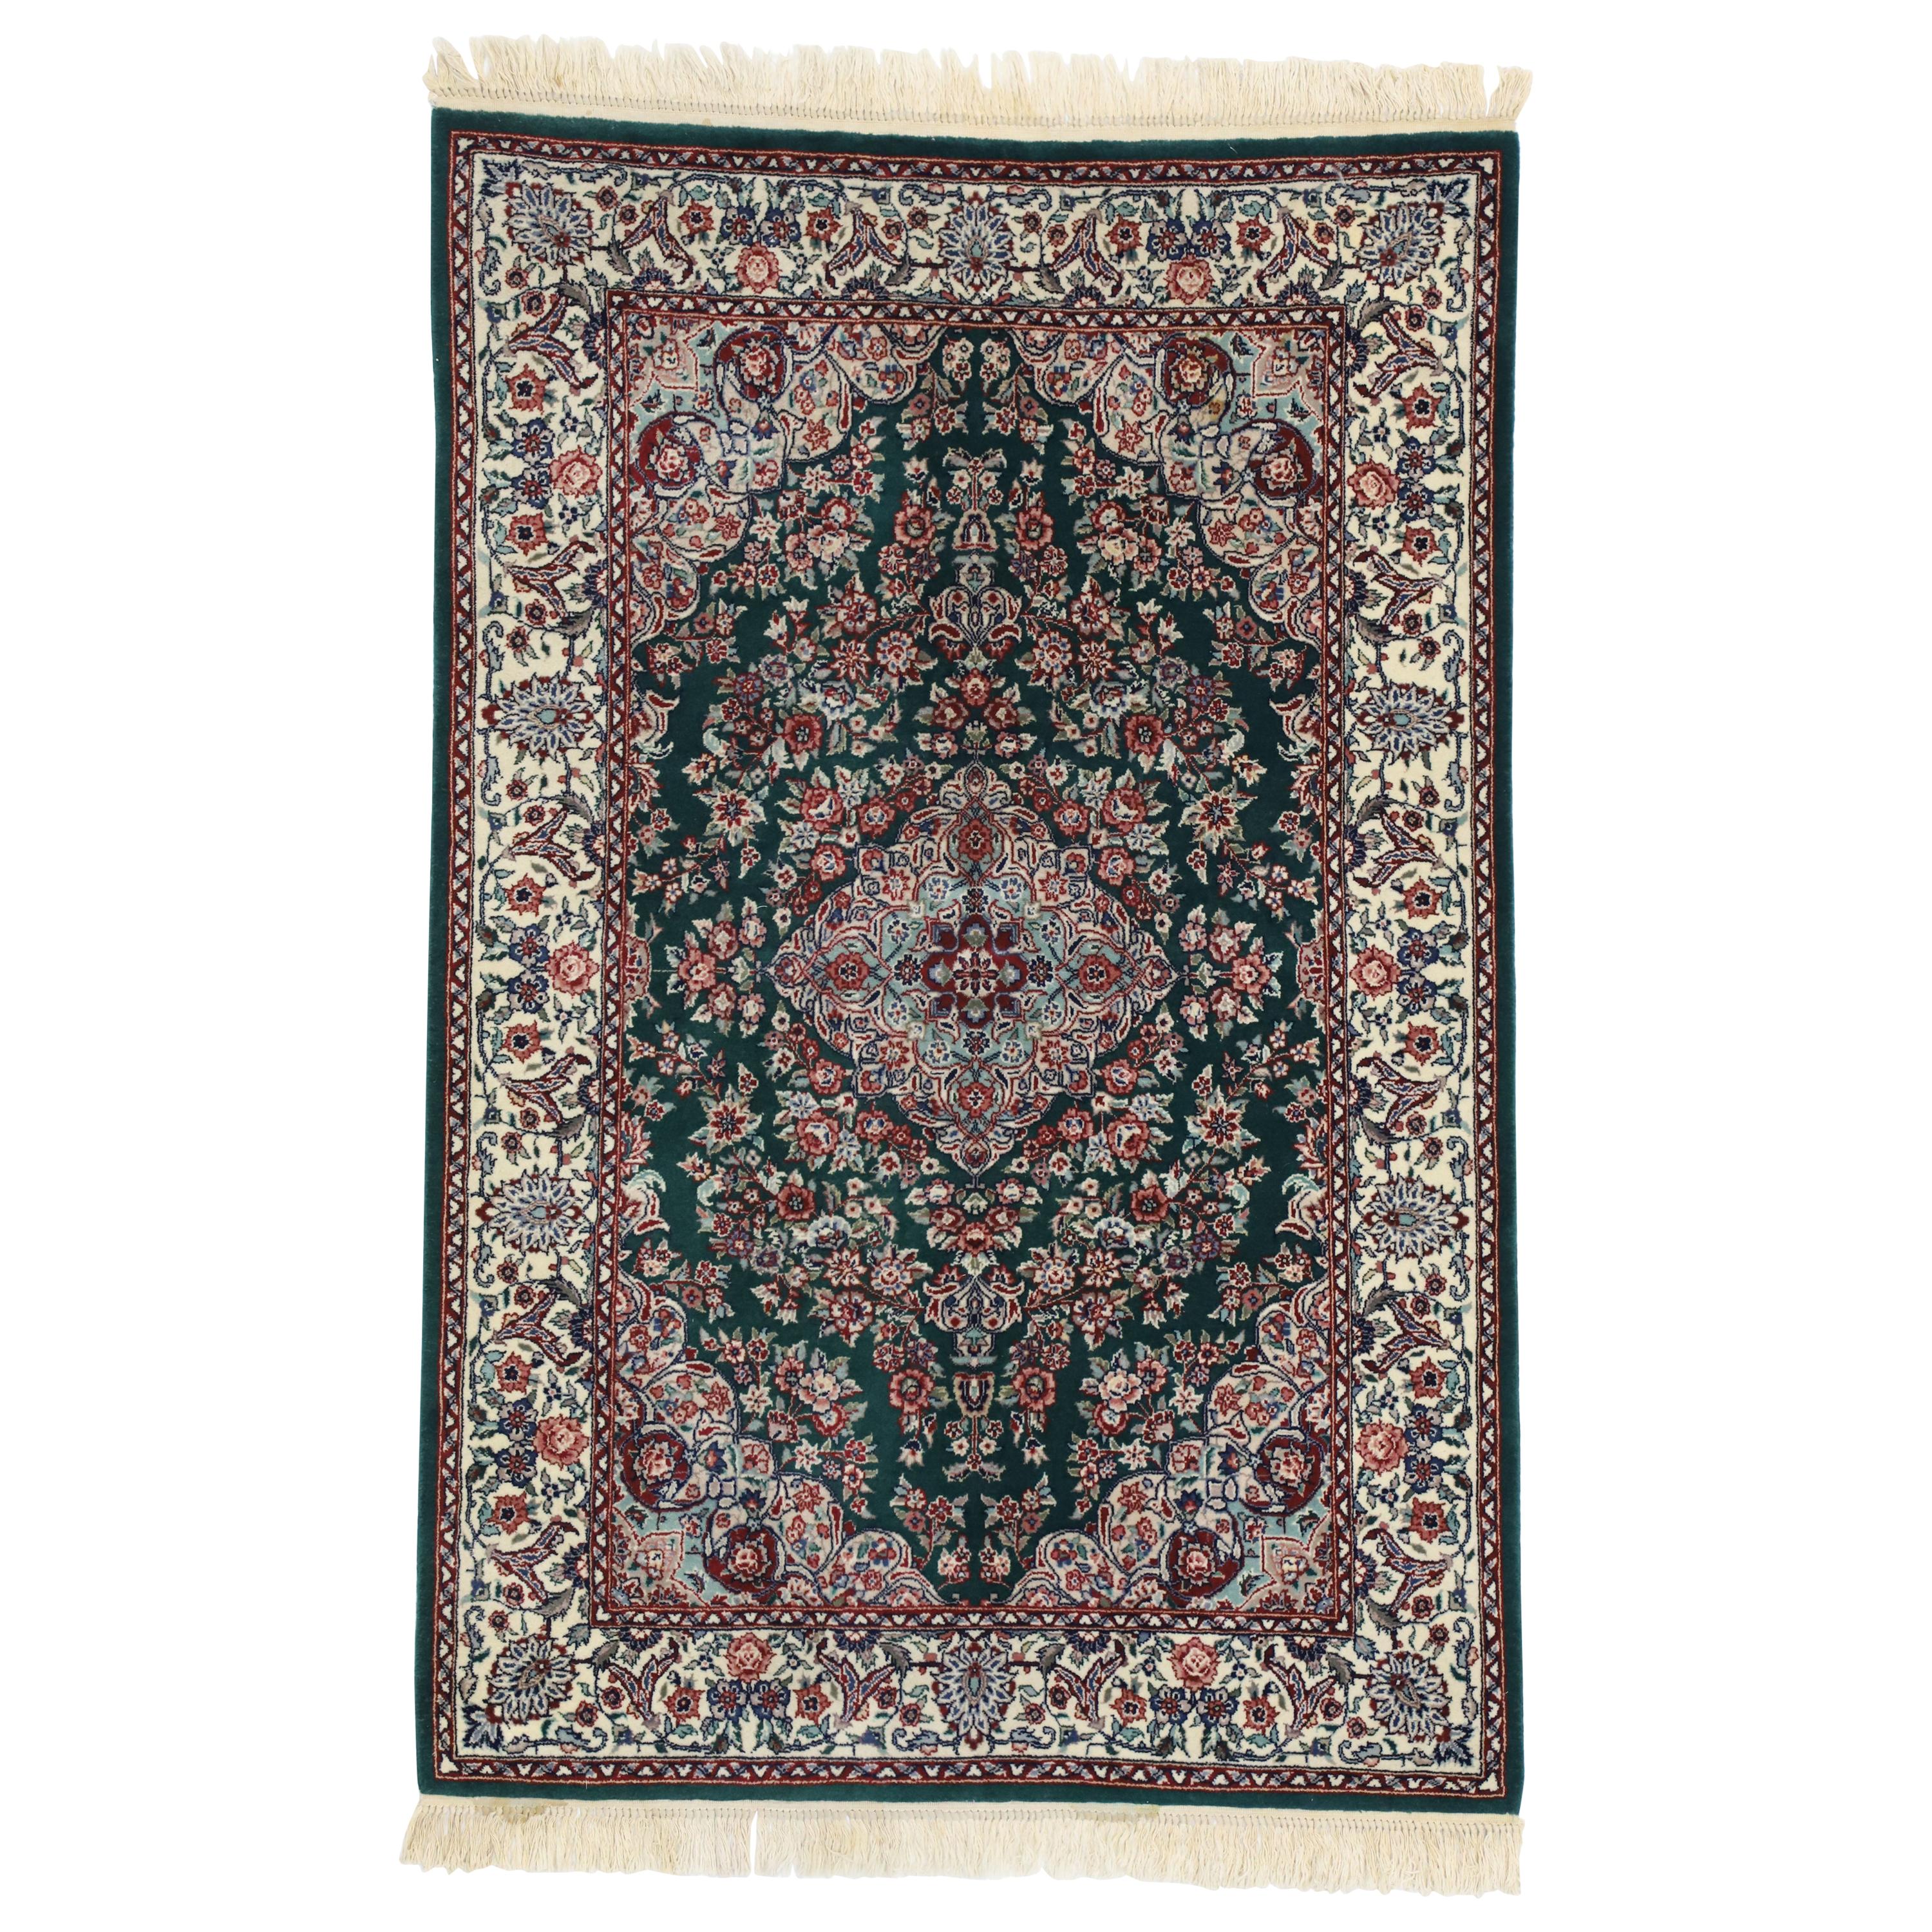 Vintage Chinese Floral Rug with Persian Design and English Country Style